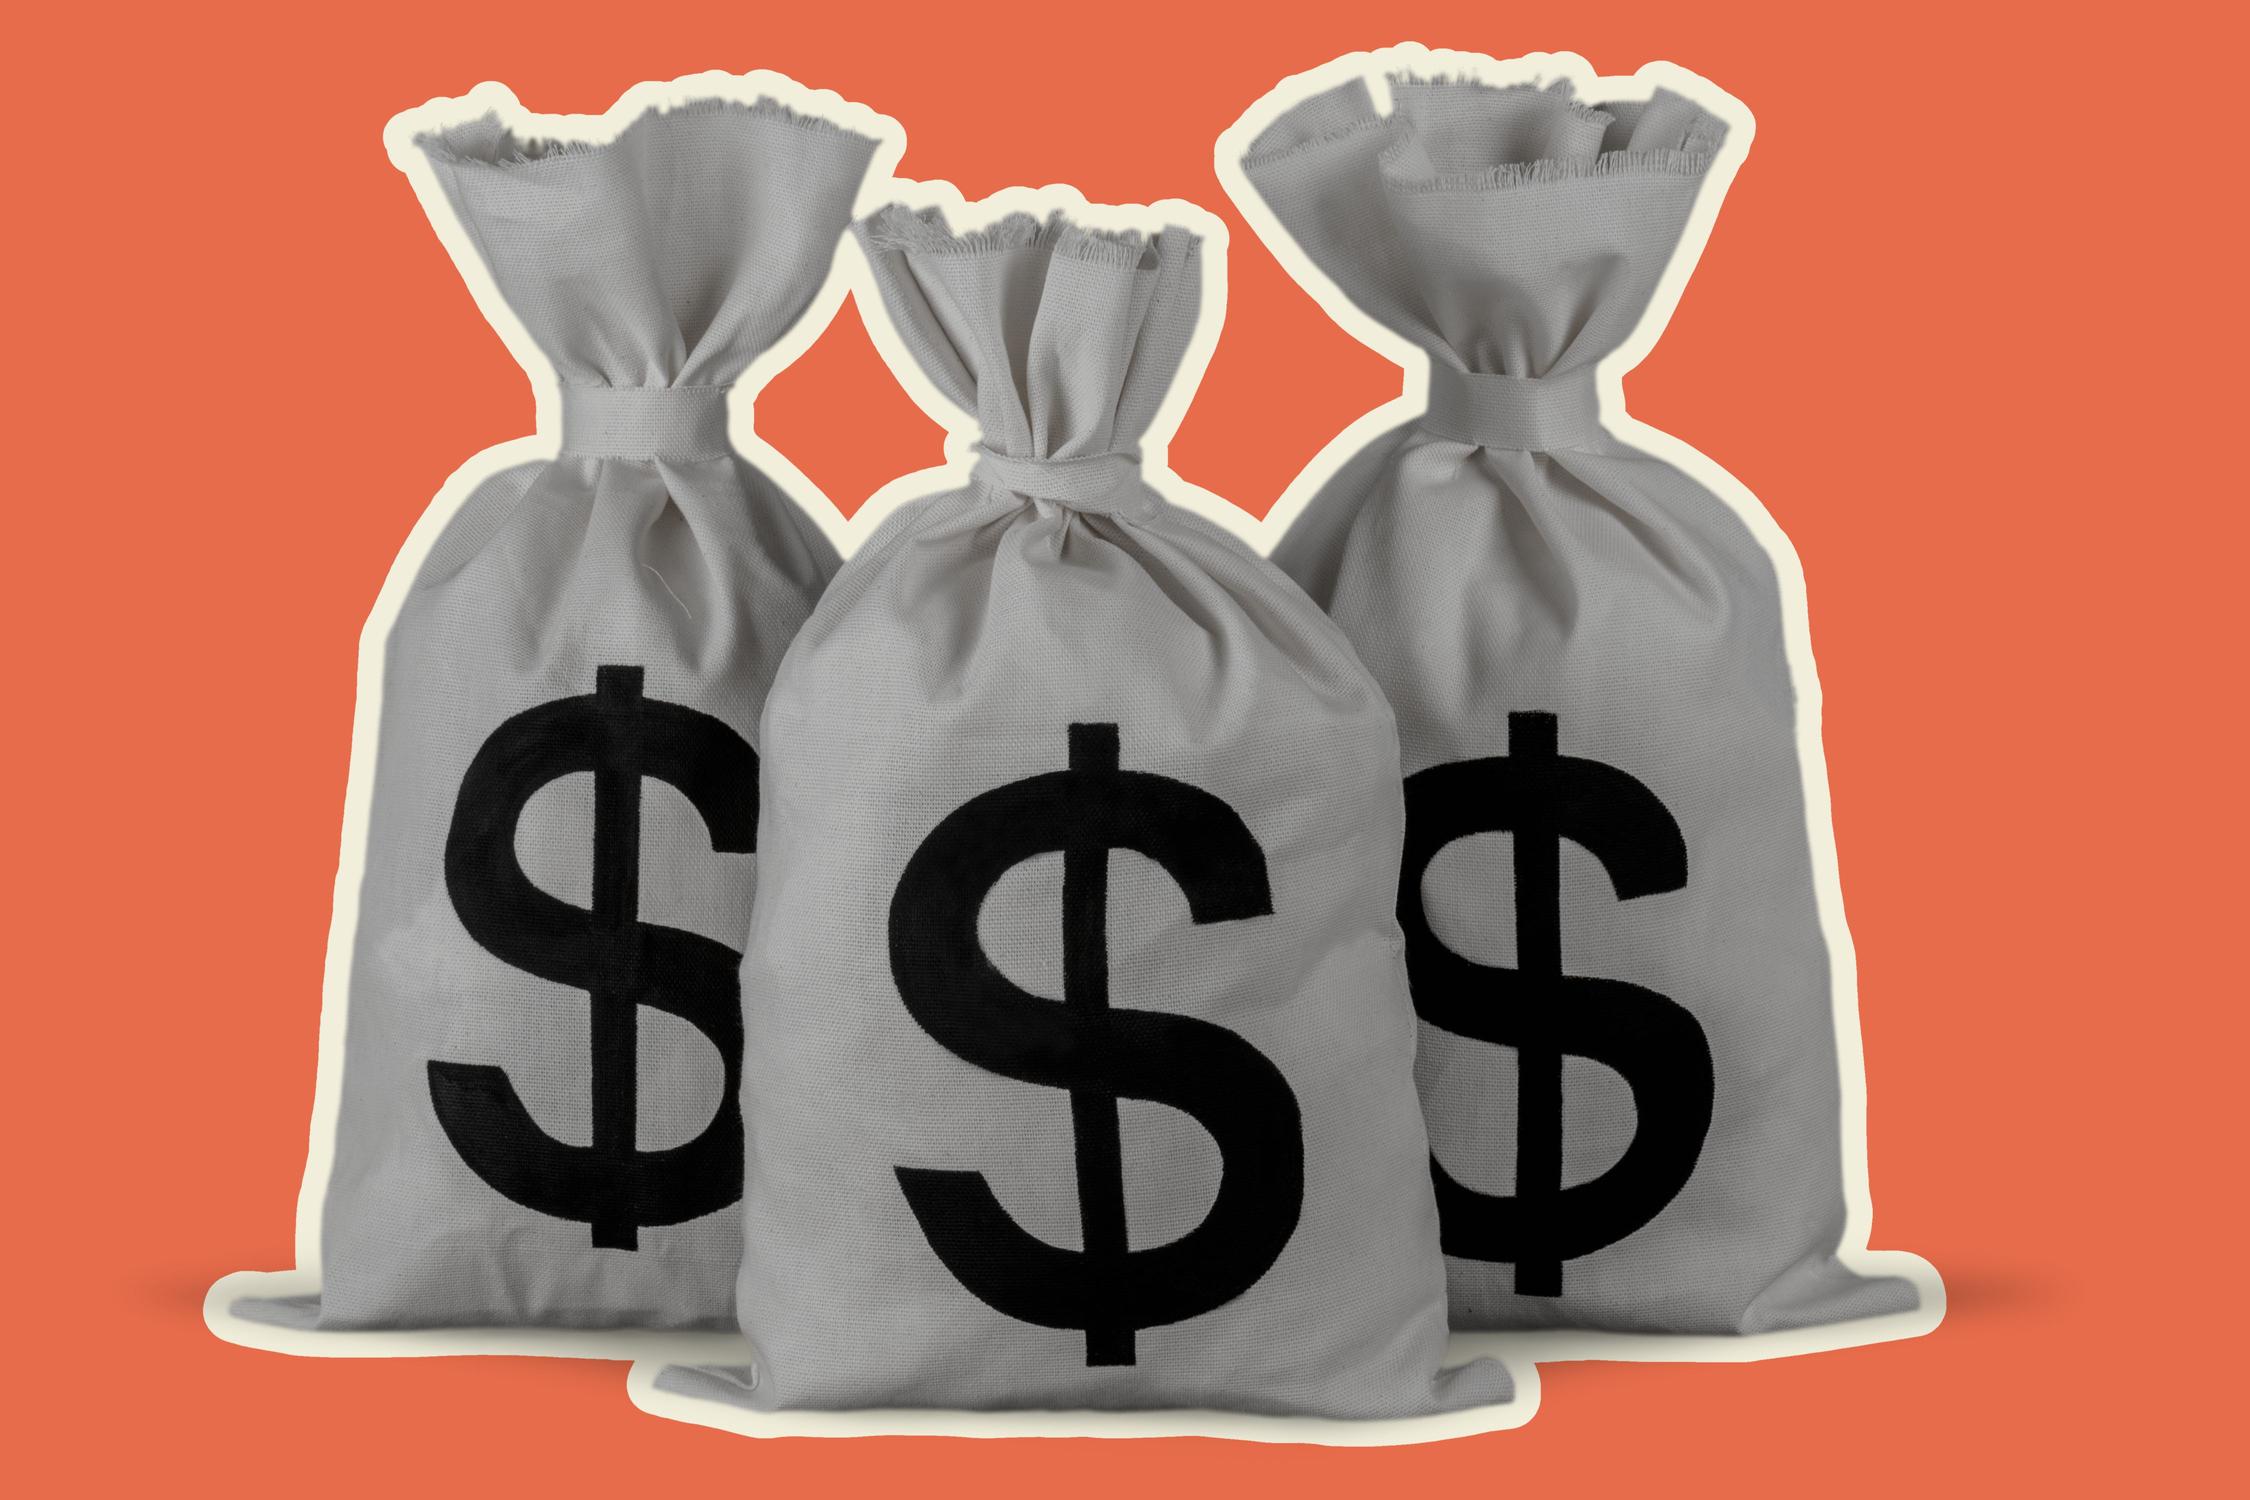 Three bags with dollar signs on them on an orange background.